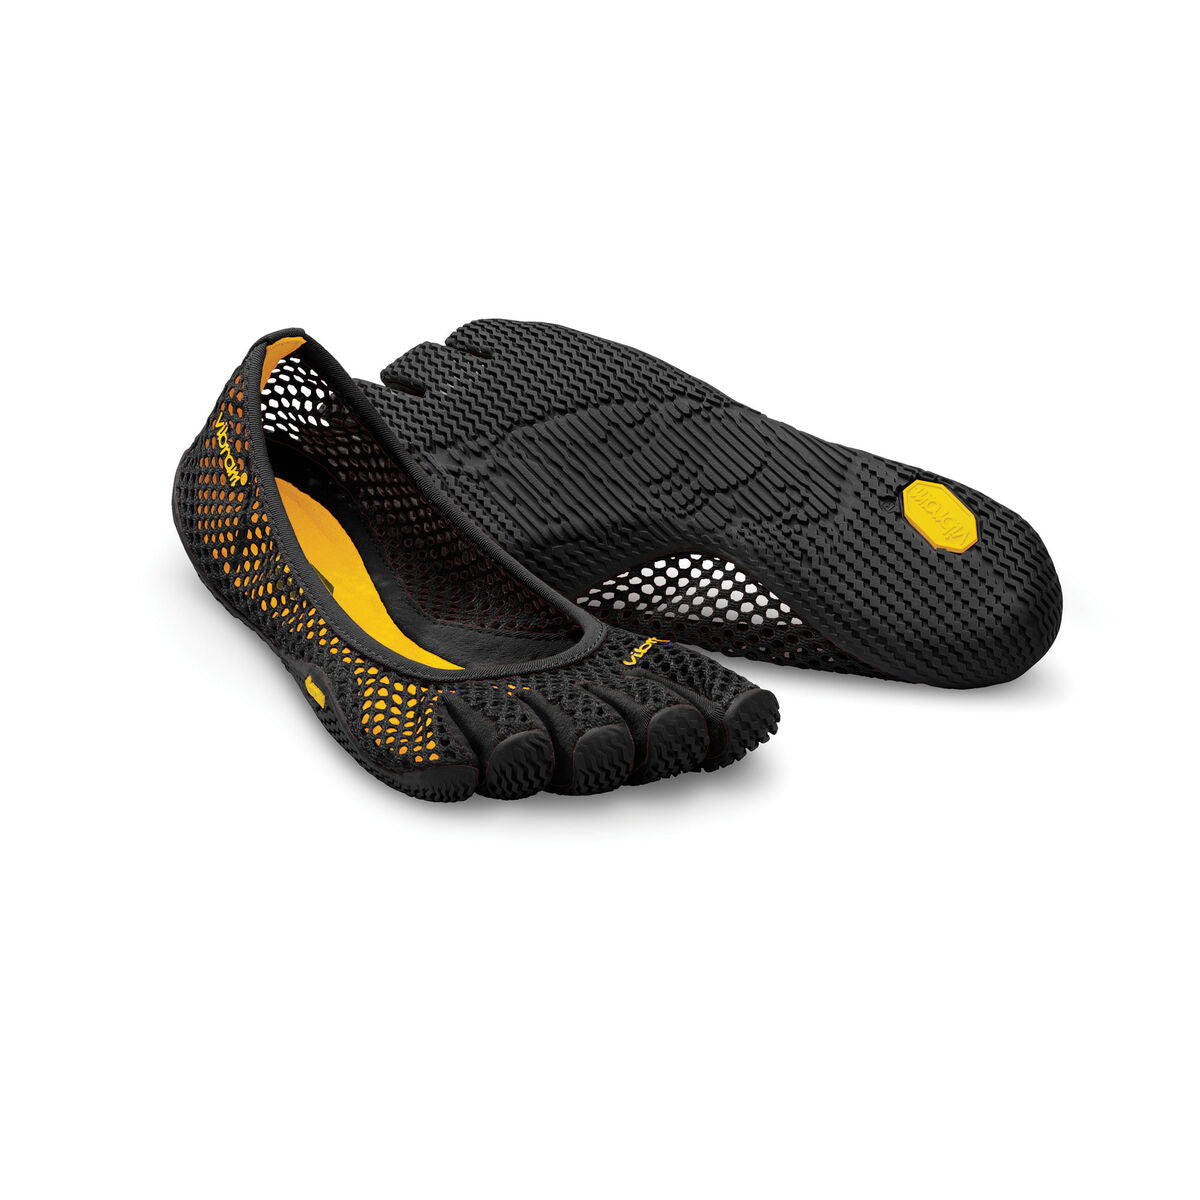 Women's Vibram Five Fingers Vi-B Training Shoe in Black from the front